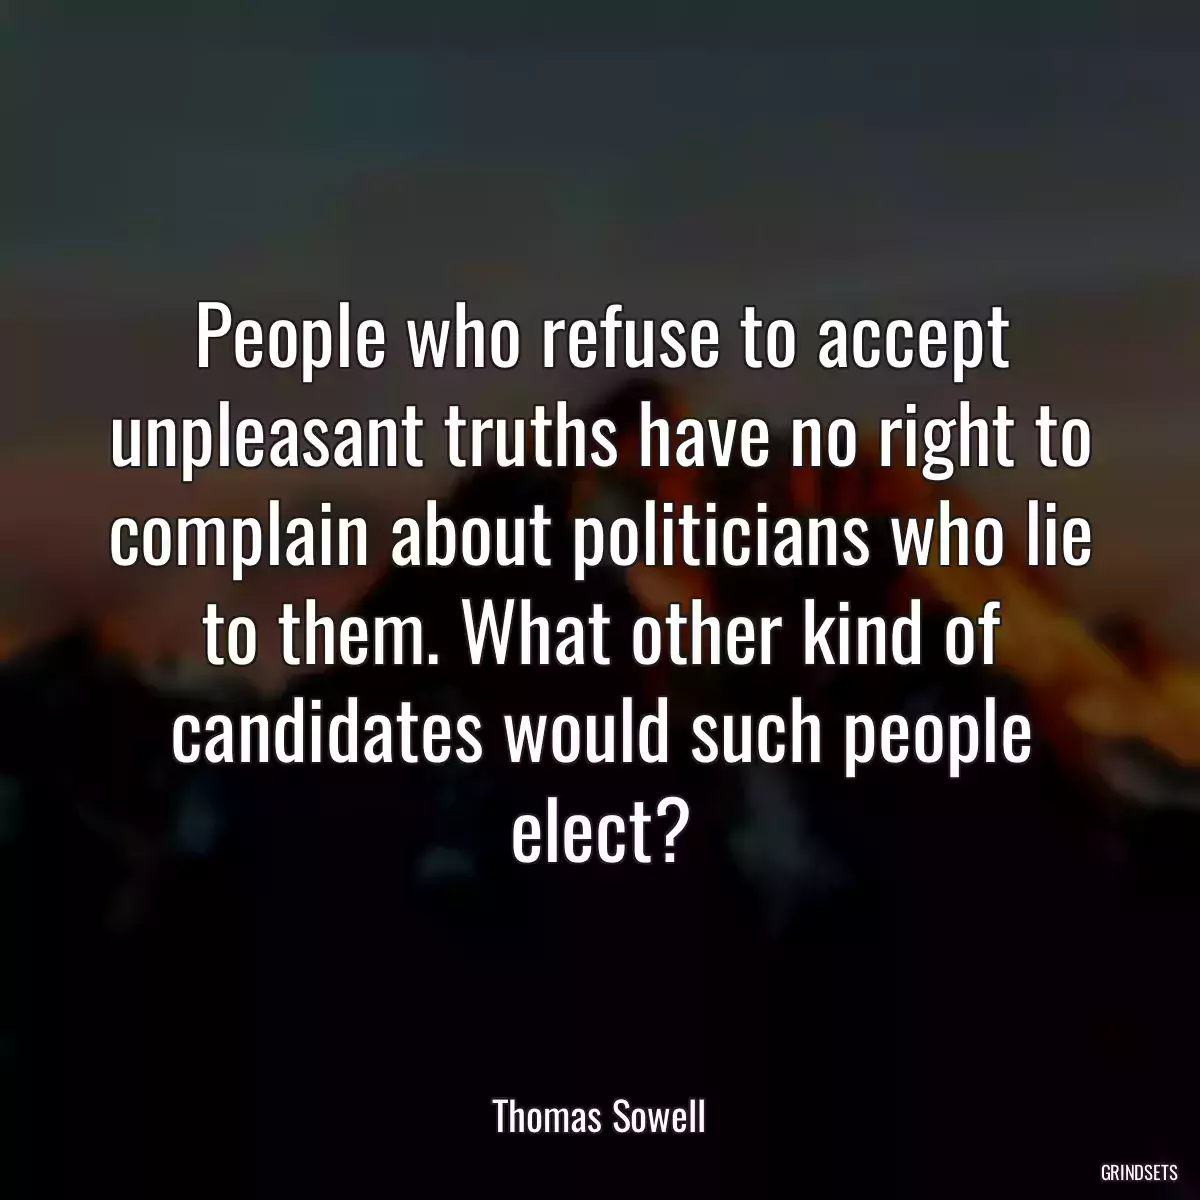 People who refuse to accept unpleasant truths have no right to complain about politicians who lie to them. What other kind of candidates would such people elect?